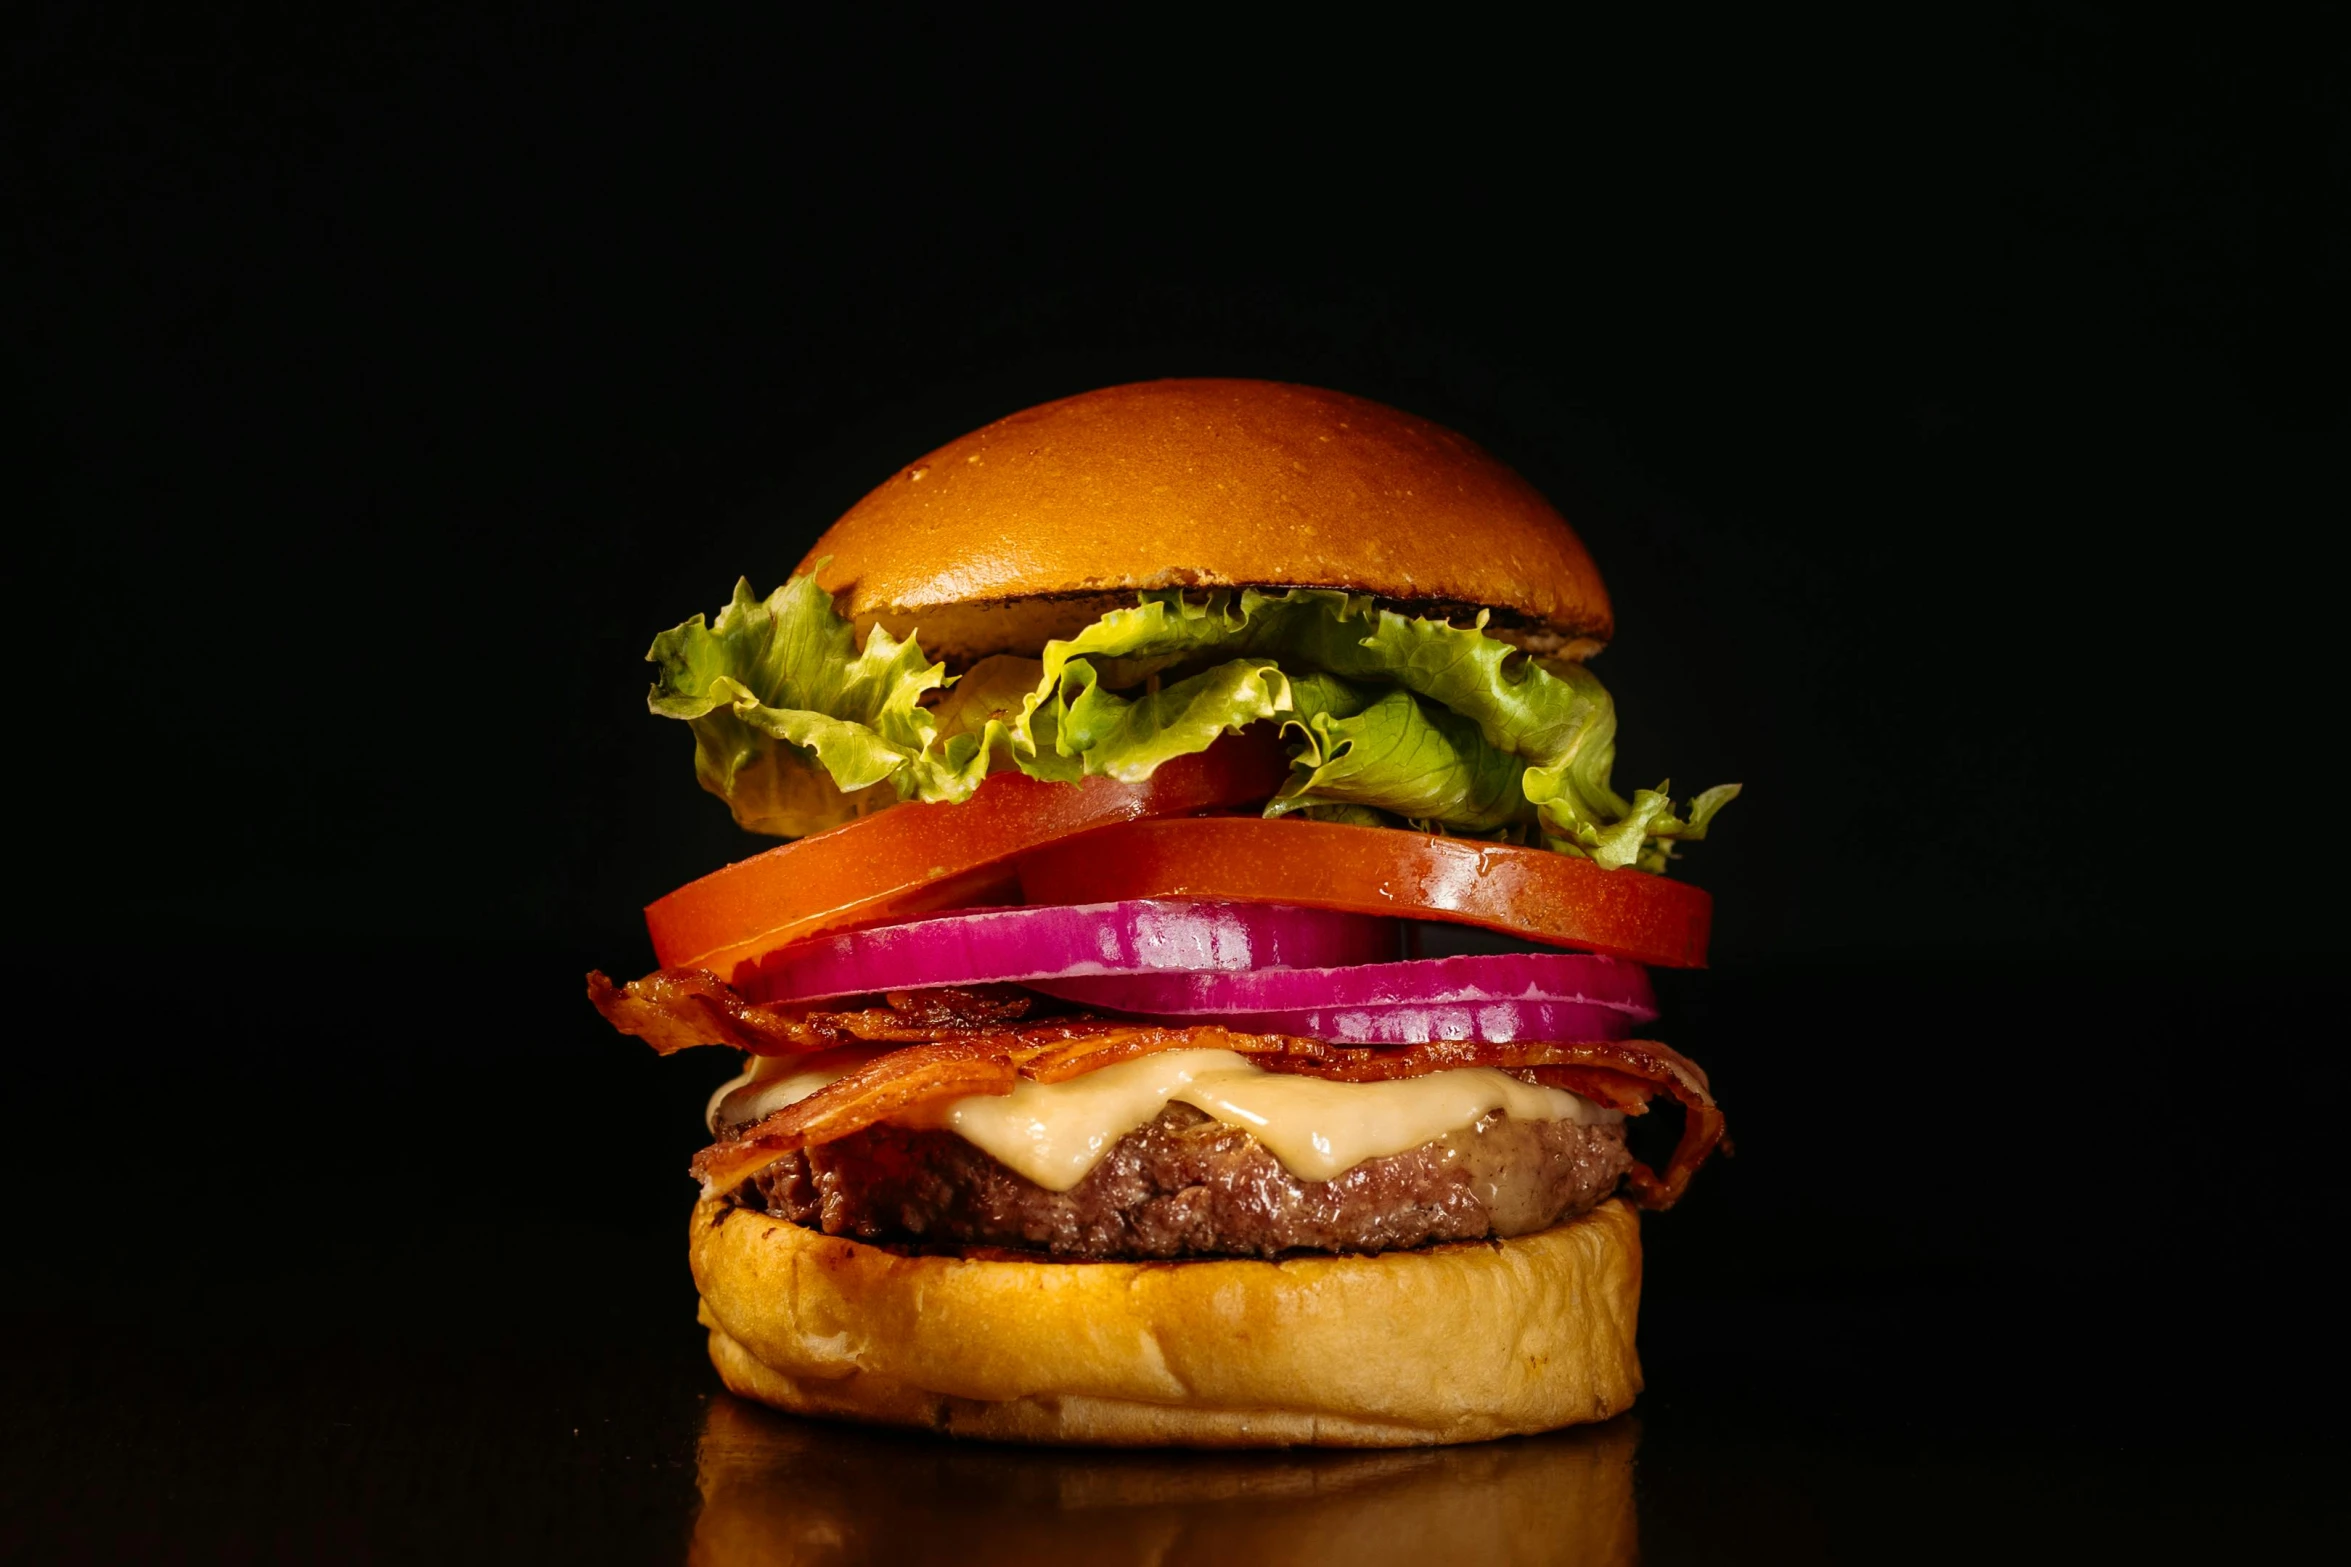 the hamburger has meat, tomato, lettuce, and onion on it